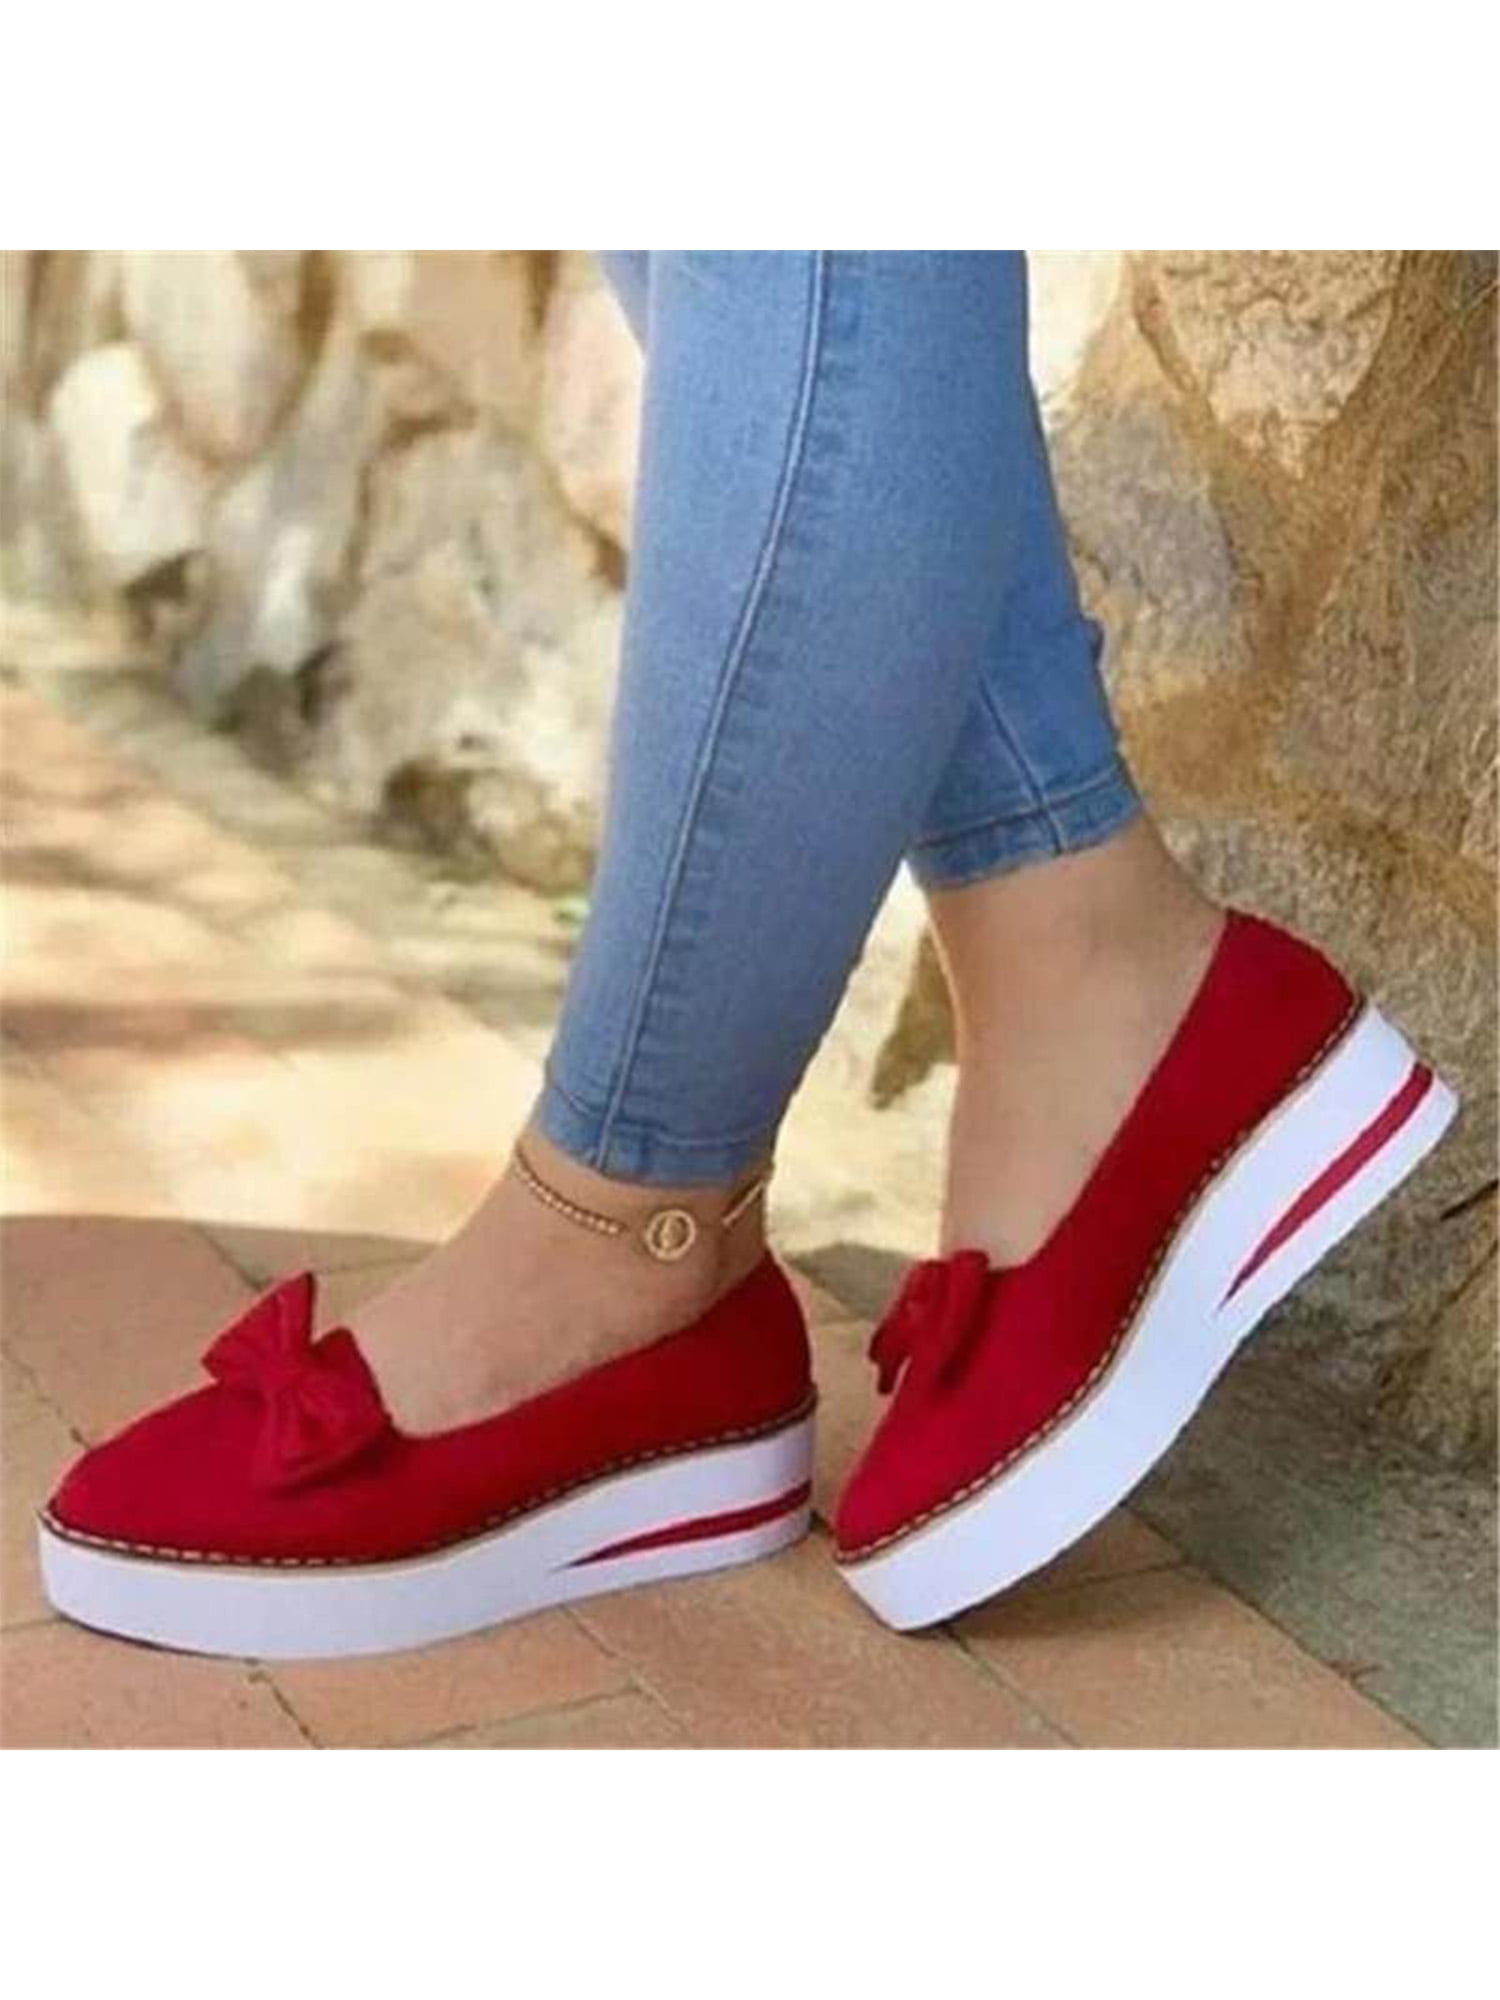 Womens Loafers Pumps Bow Boat Shoes Ladies Slip on Flats Comfort Casual Shoes 